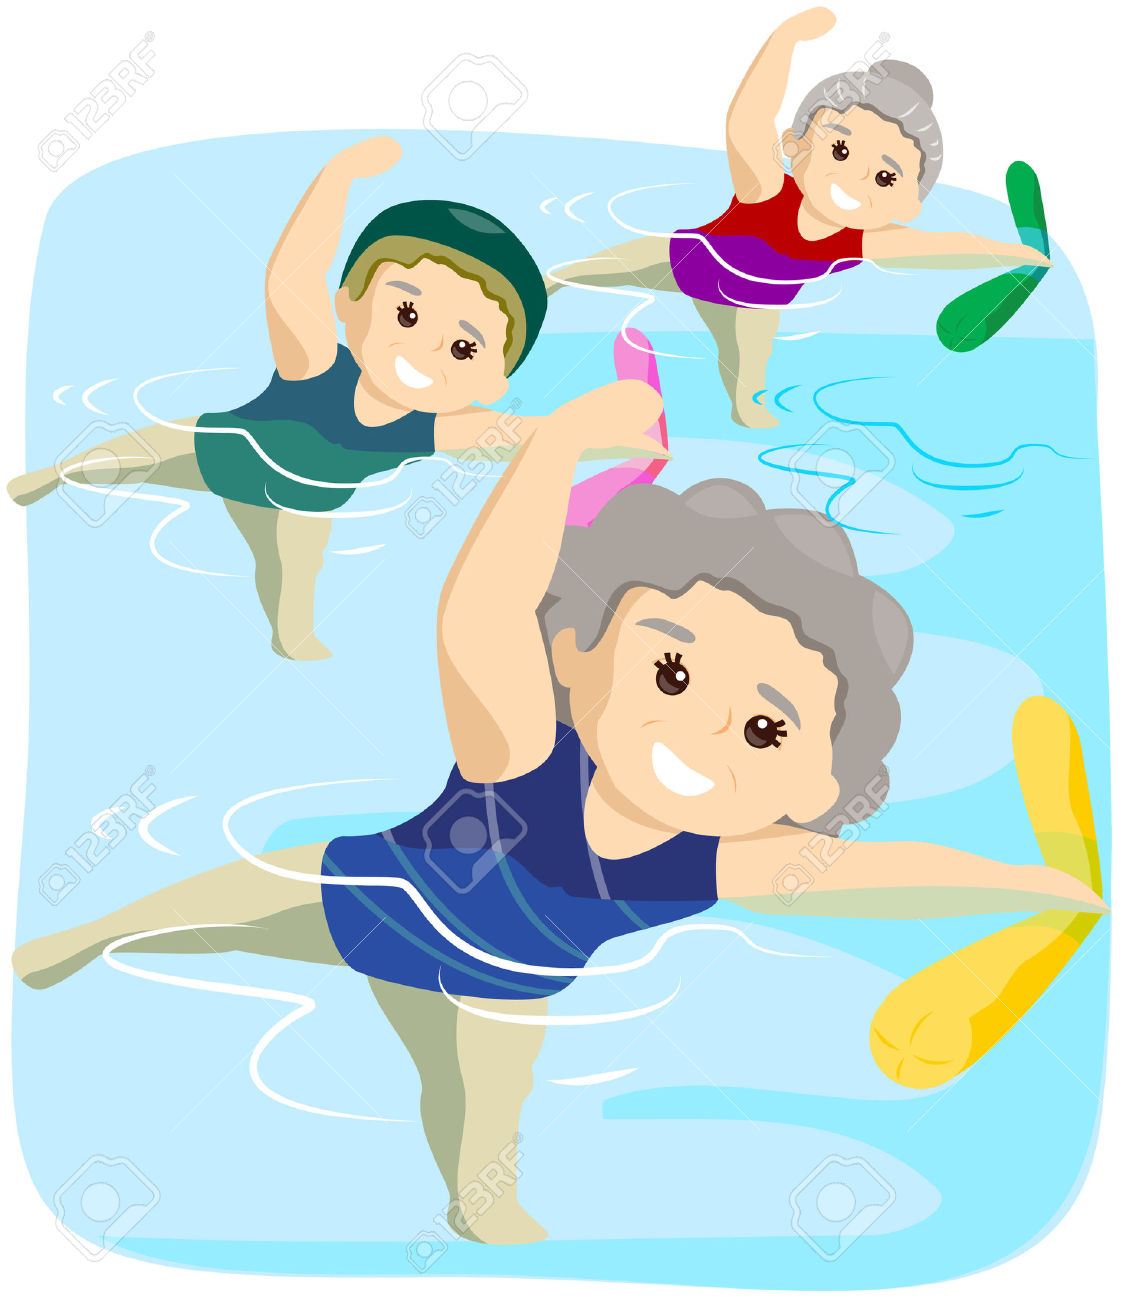 4090183 Water Exercise for Seniors with Clipping Path Stock Vector swimming